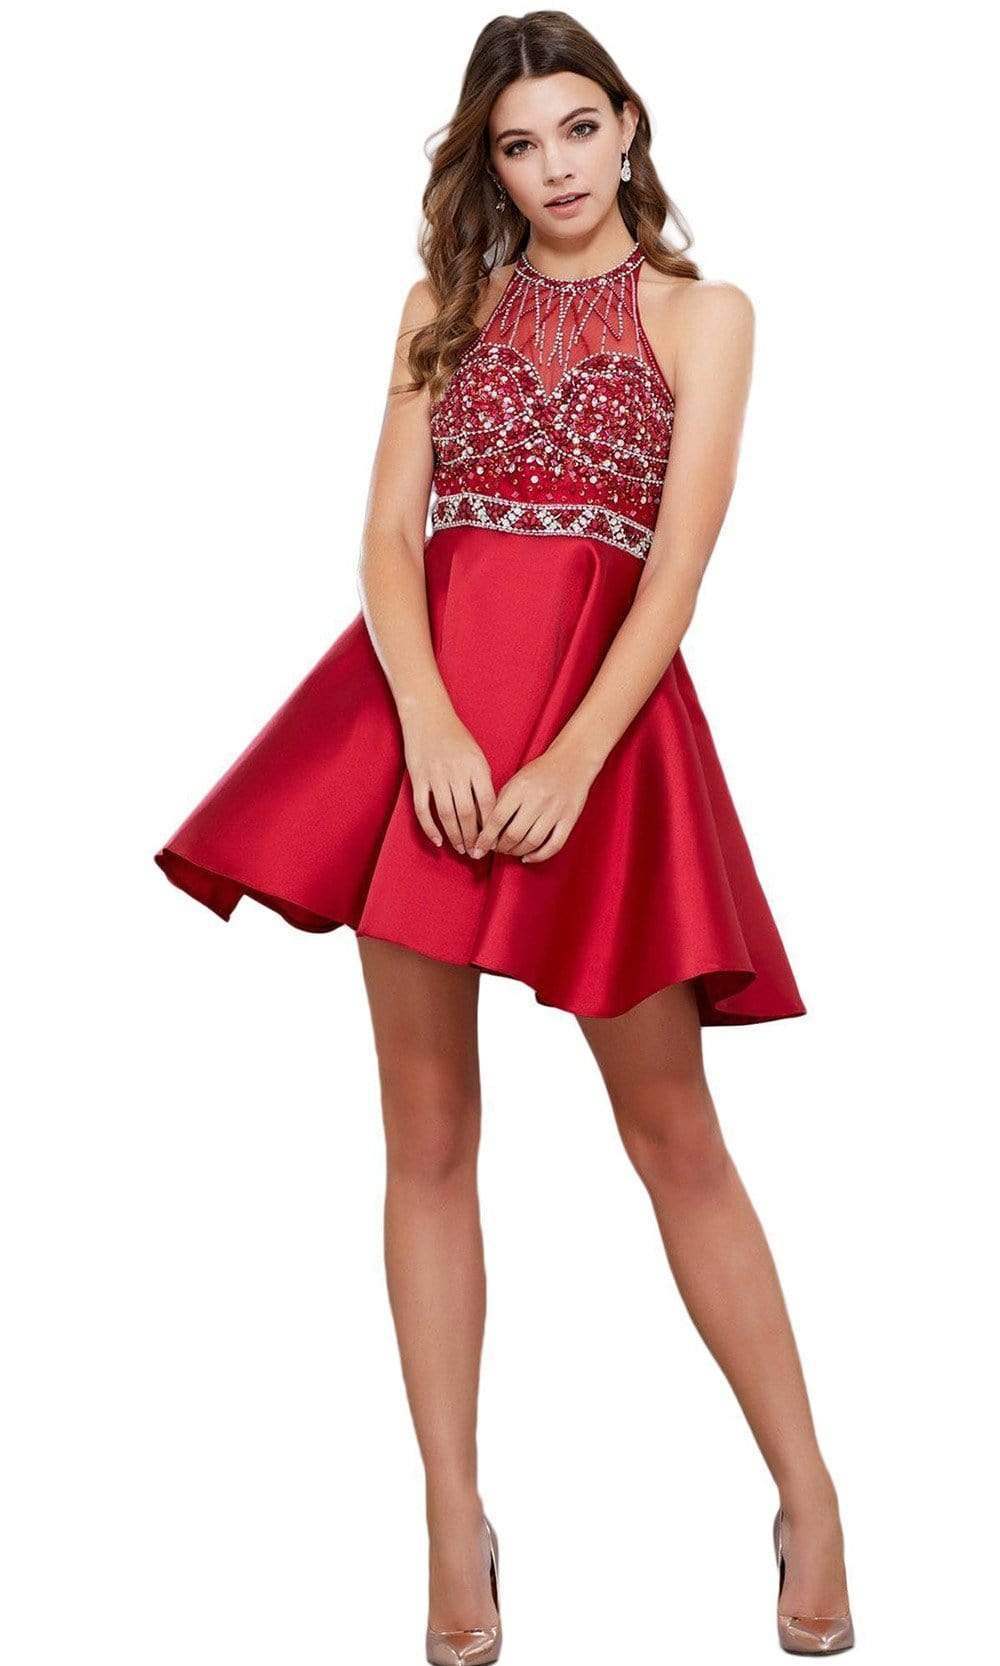 Nox Anabel - 6262 Ornate High Halter Illusion Cocktail Dress Special Occasion Dress XS / Burgundy